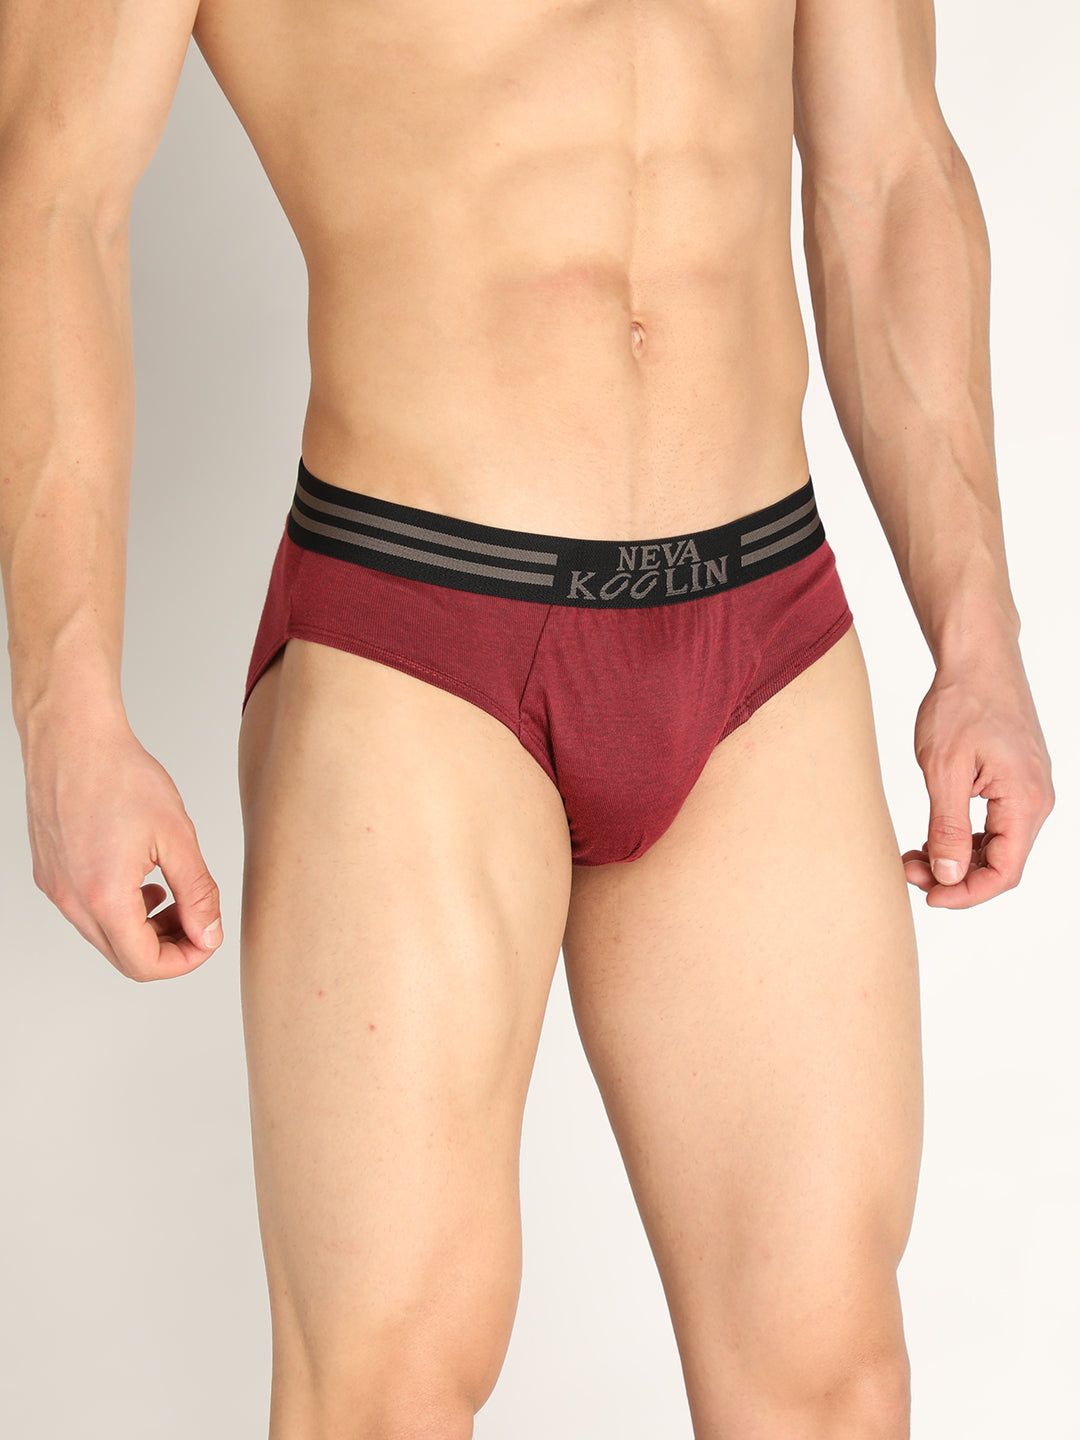 Neva Koolin Men's Solid Underwear Brief in Maroon, Navy, Air Force, Olive Collection (Pack of 4)